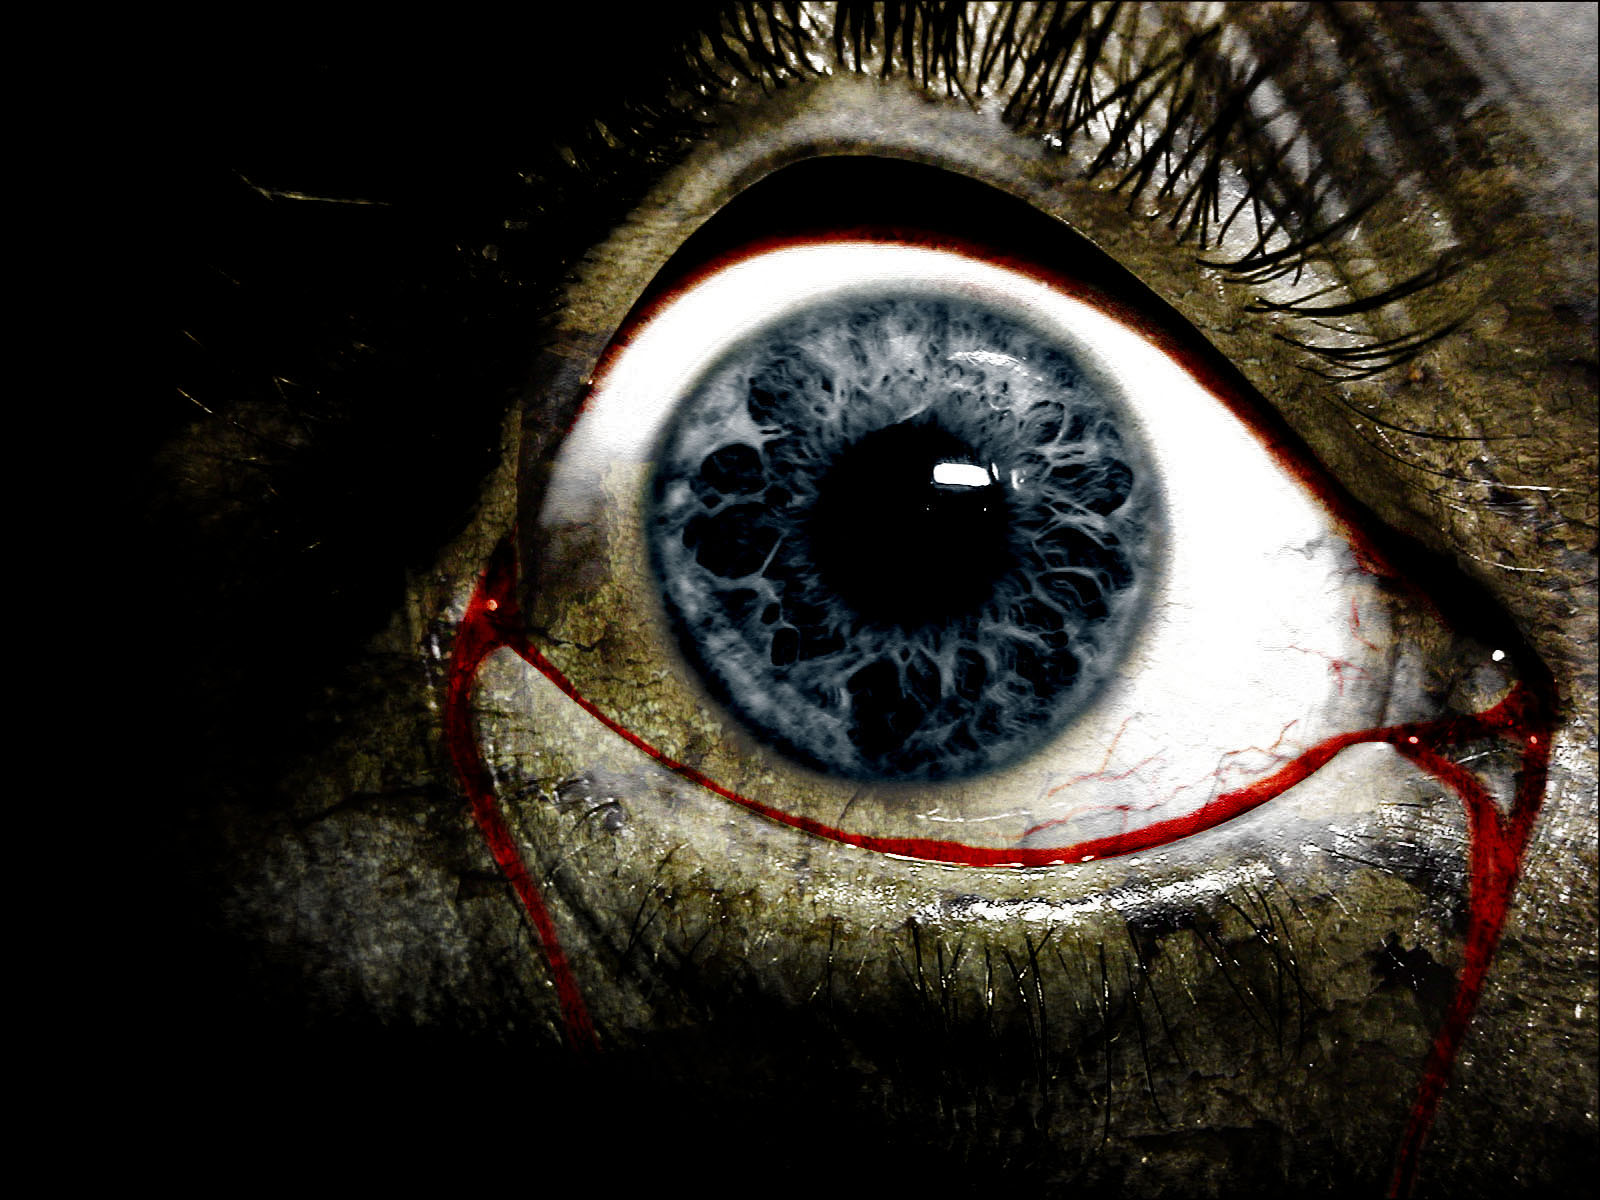 Posted in Wallpapers | Tagged blood, creepy, dark, death, emo, eye, goth, 